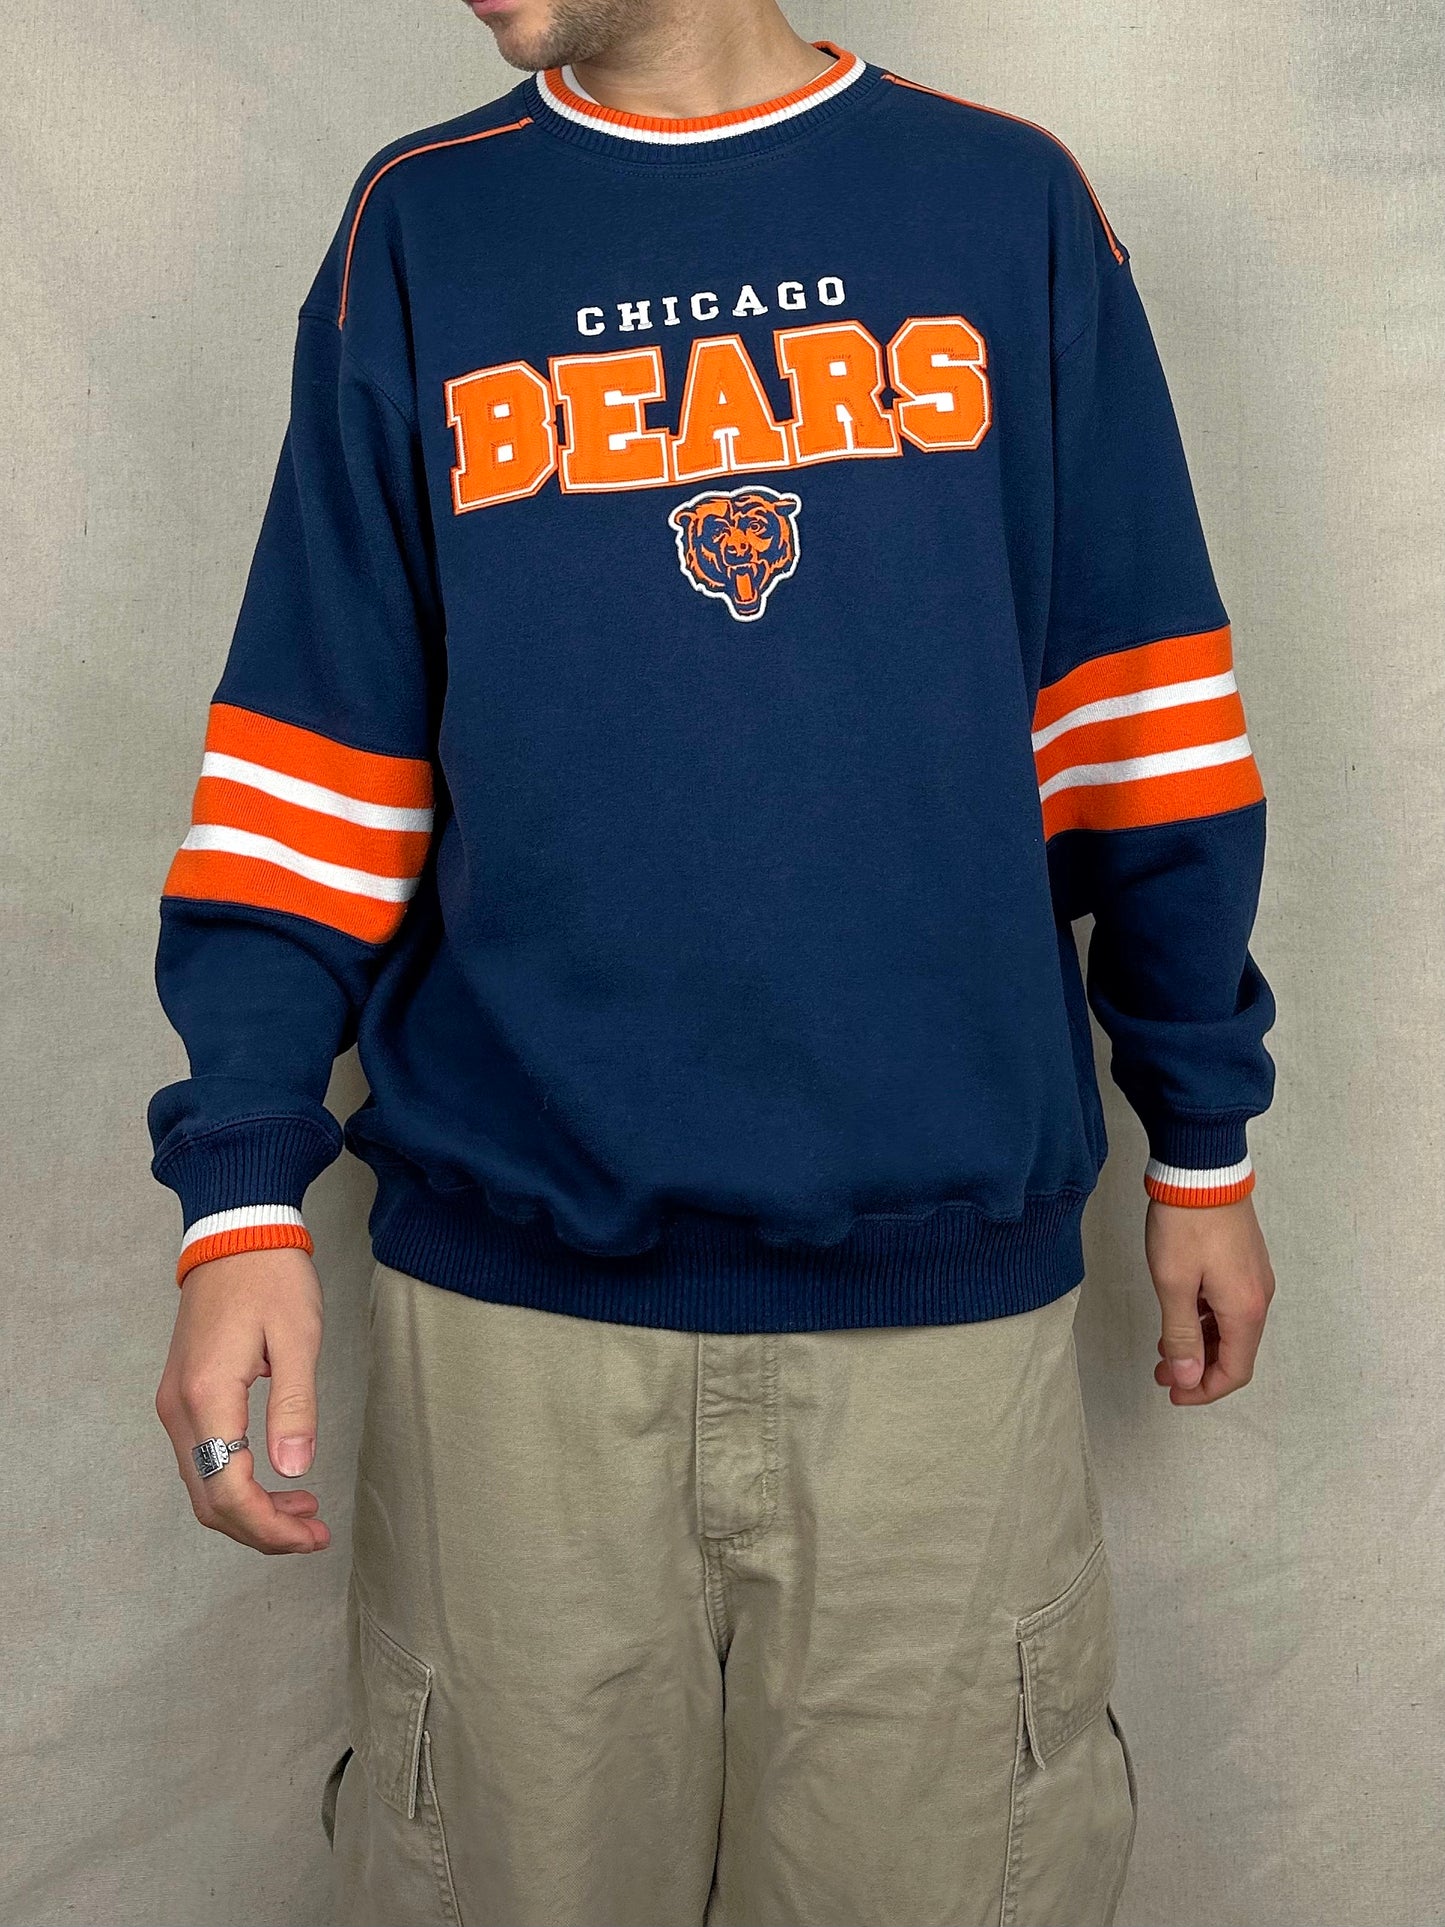 90's Chicago Bears NFL Embroidered Vintage Sweatshirt Size XL